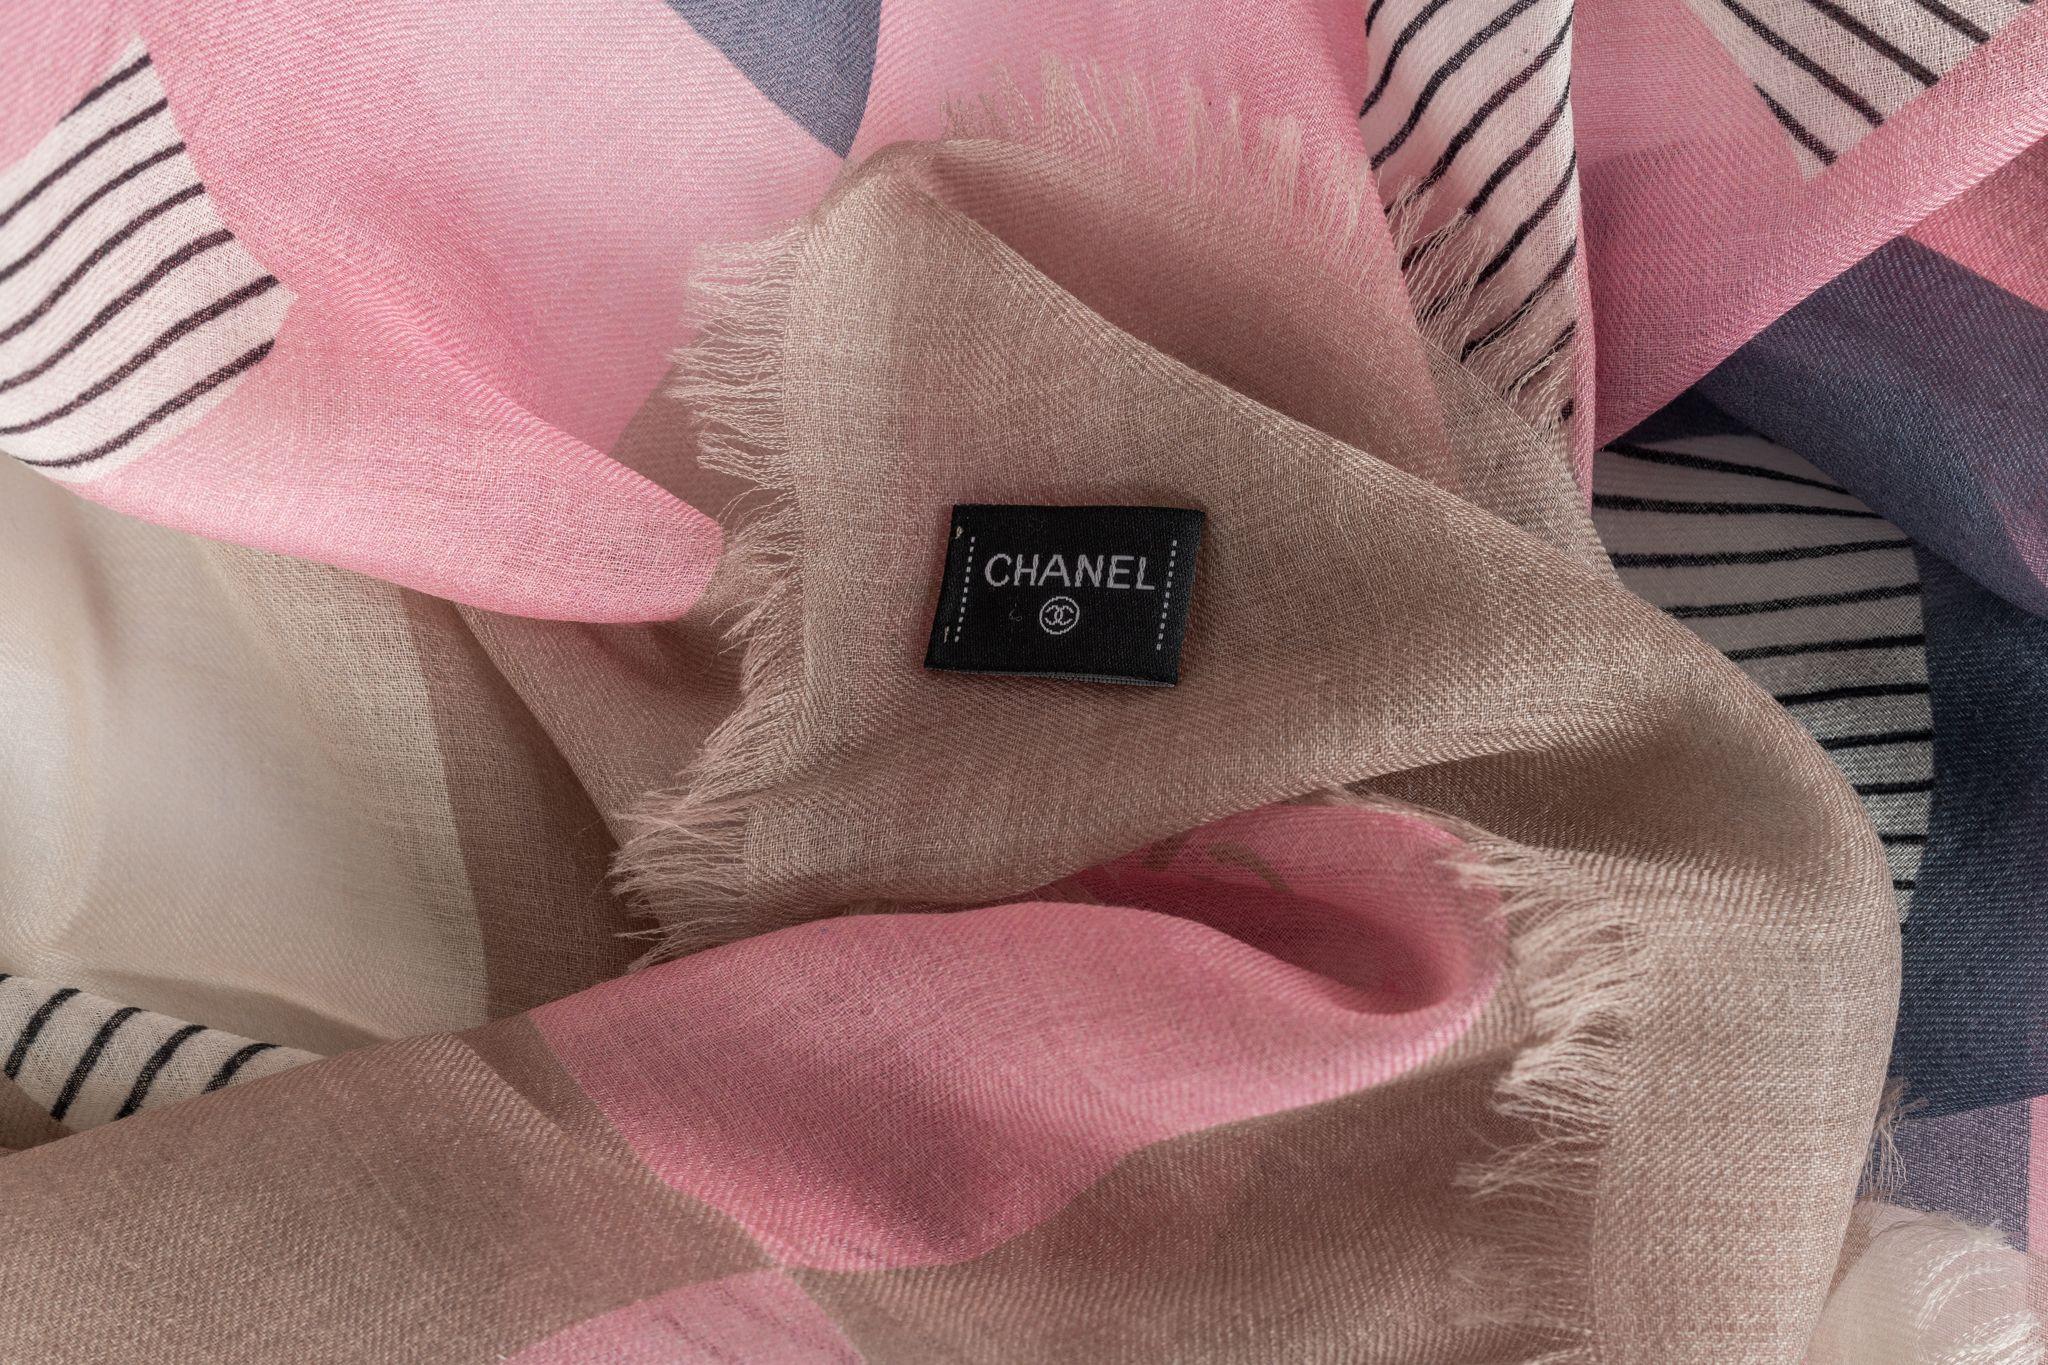 Chanel Cashmere Shawl with a Checkered Pattern in the colors light blue and rose plus CC logo prints. The item is in new condition.